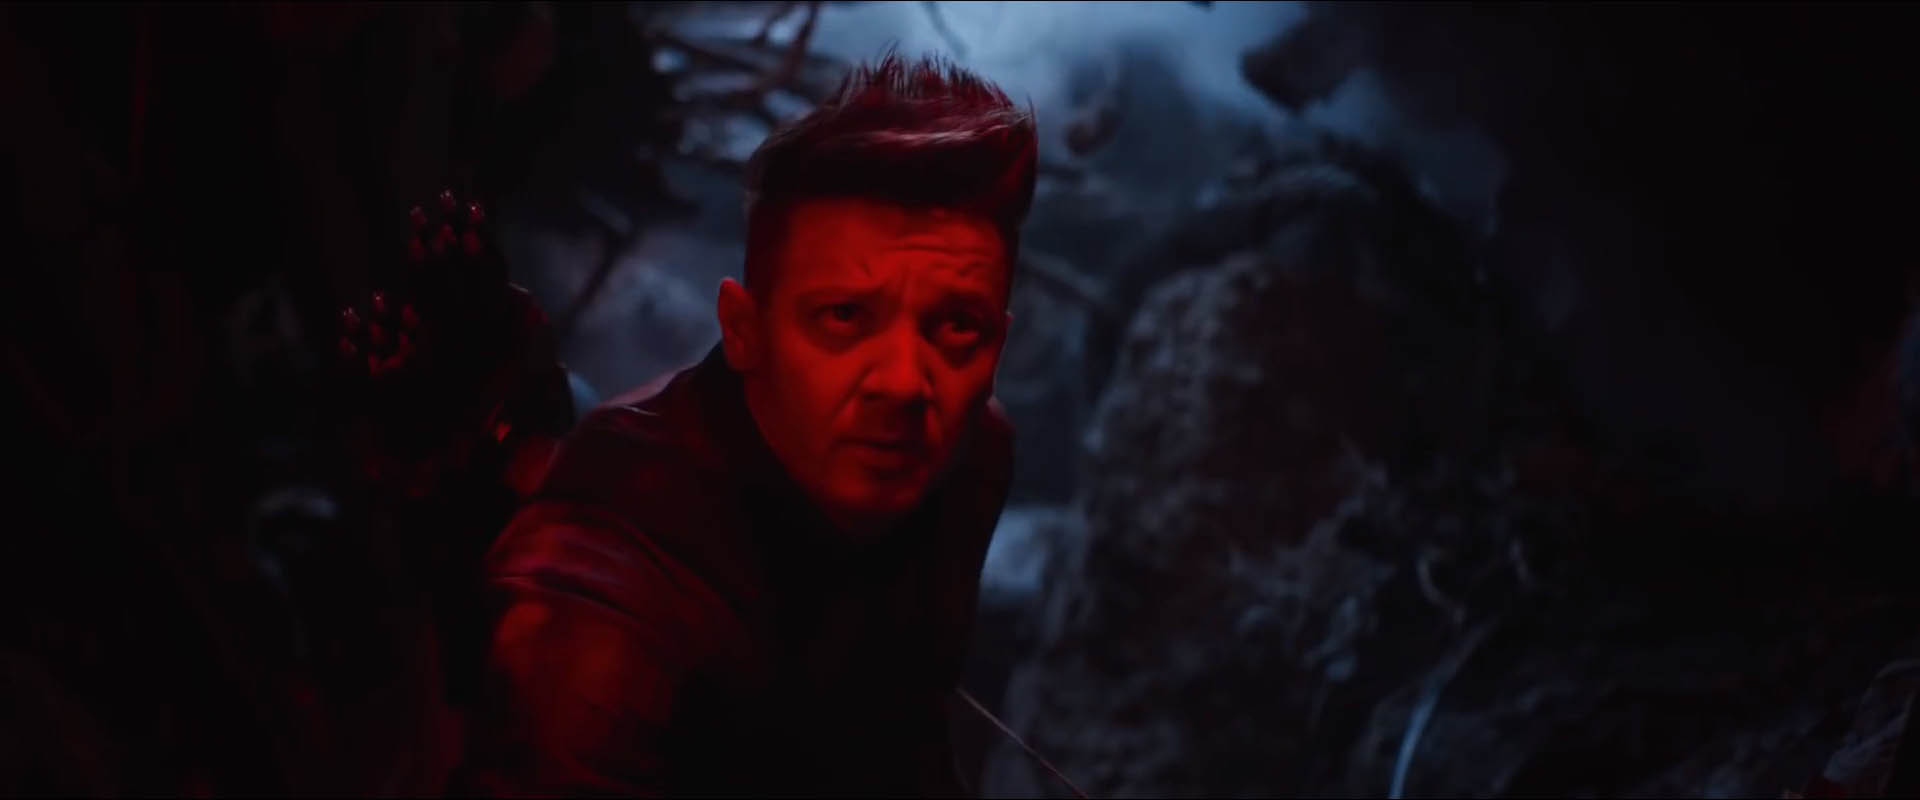 Avengers: Endgame Super Bowl commercial shows off new footage1920 x 800